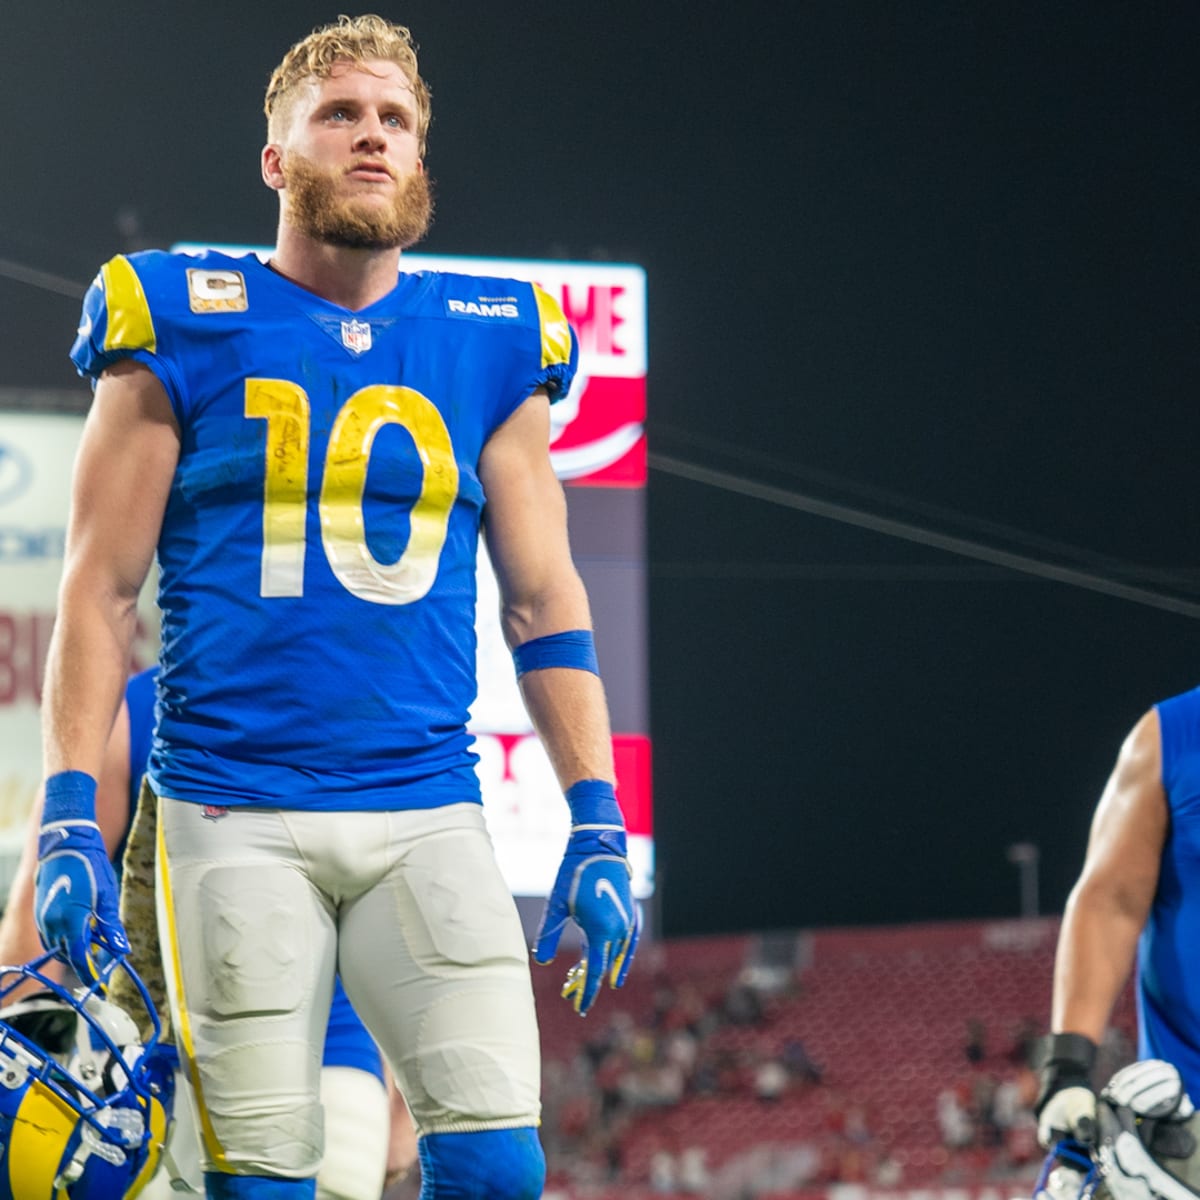 Cooper Kupp COVID-19 news throws Rams further in disarray